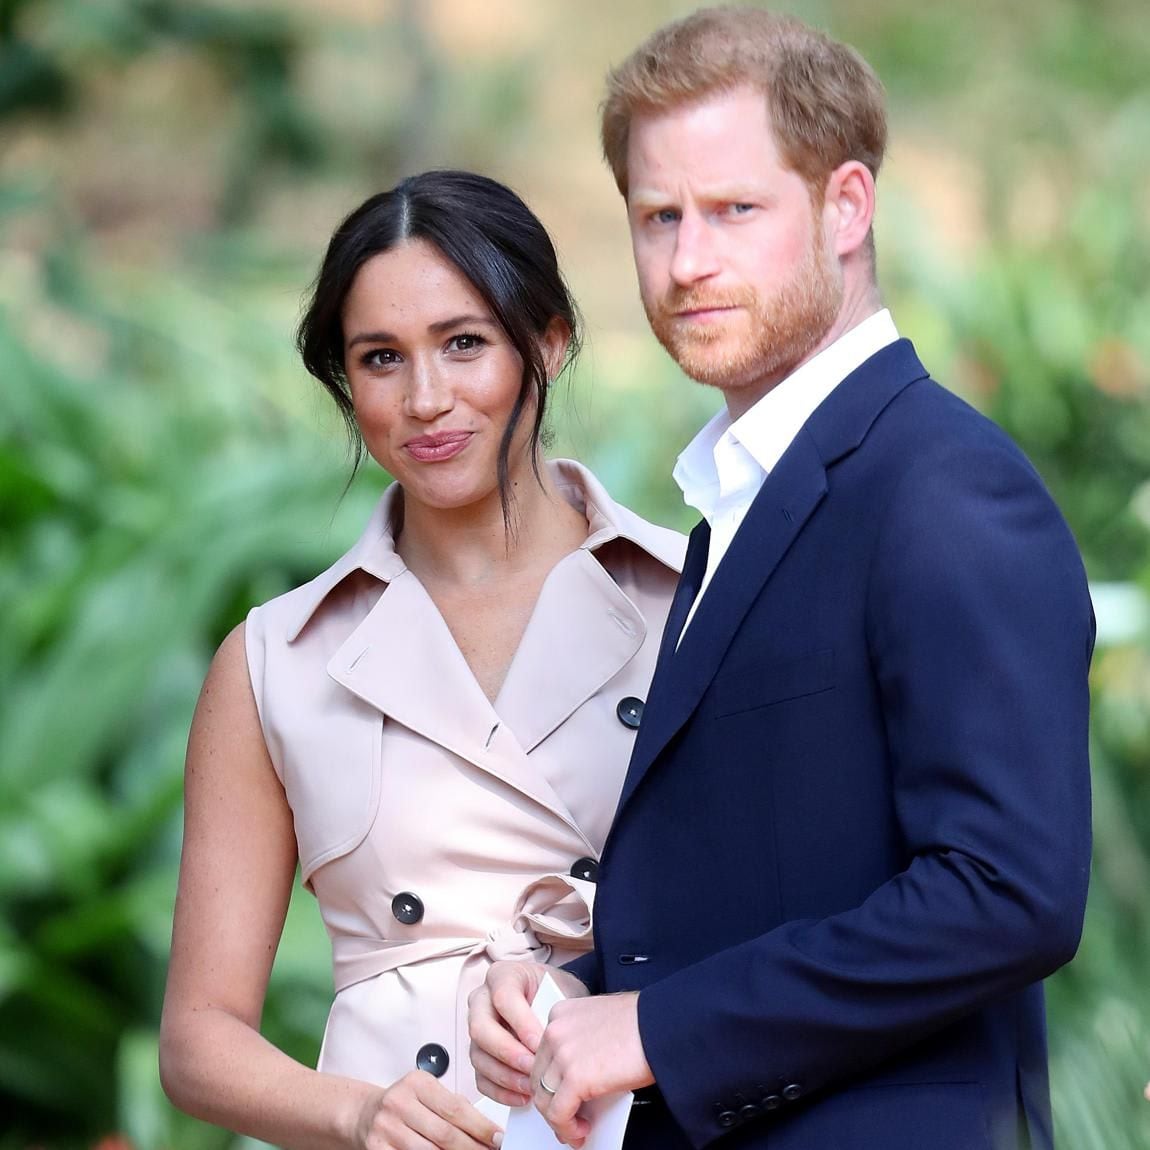 Meghan Markle and Prince Harry are returning to royal duties after taking time off in Canada